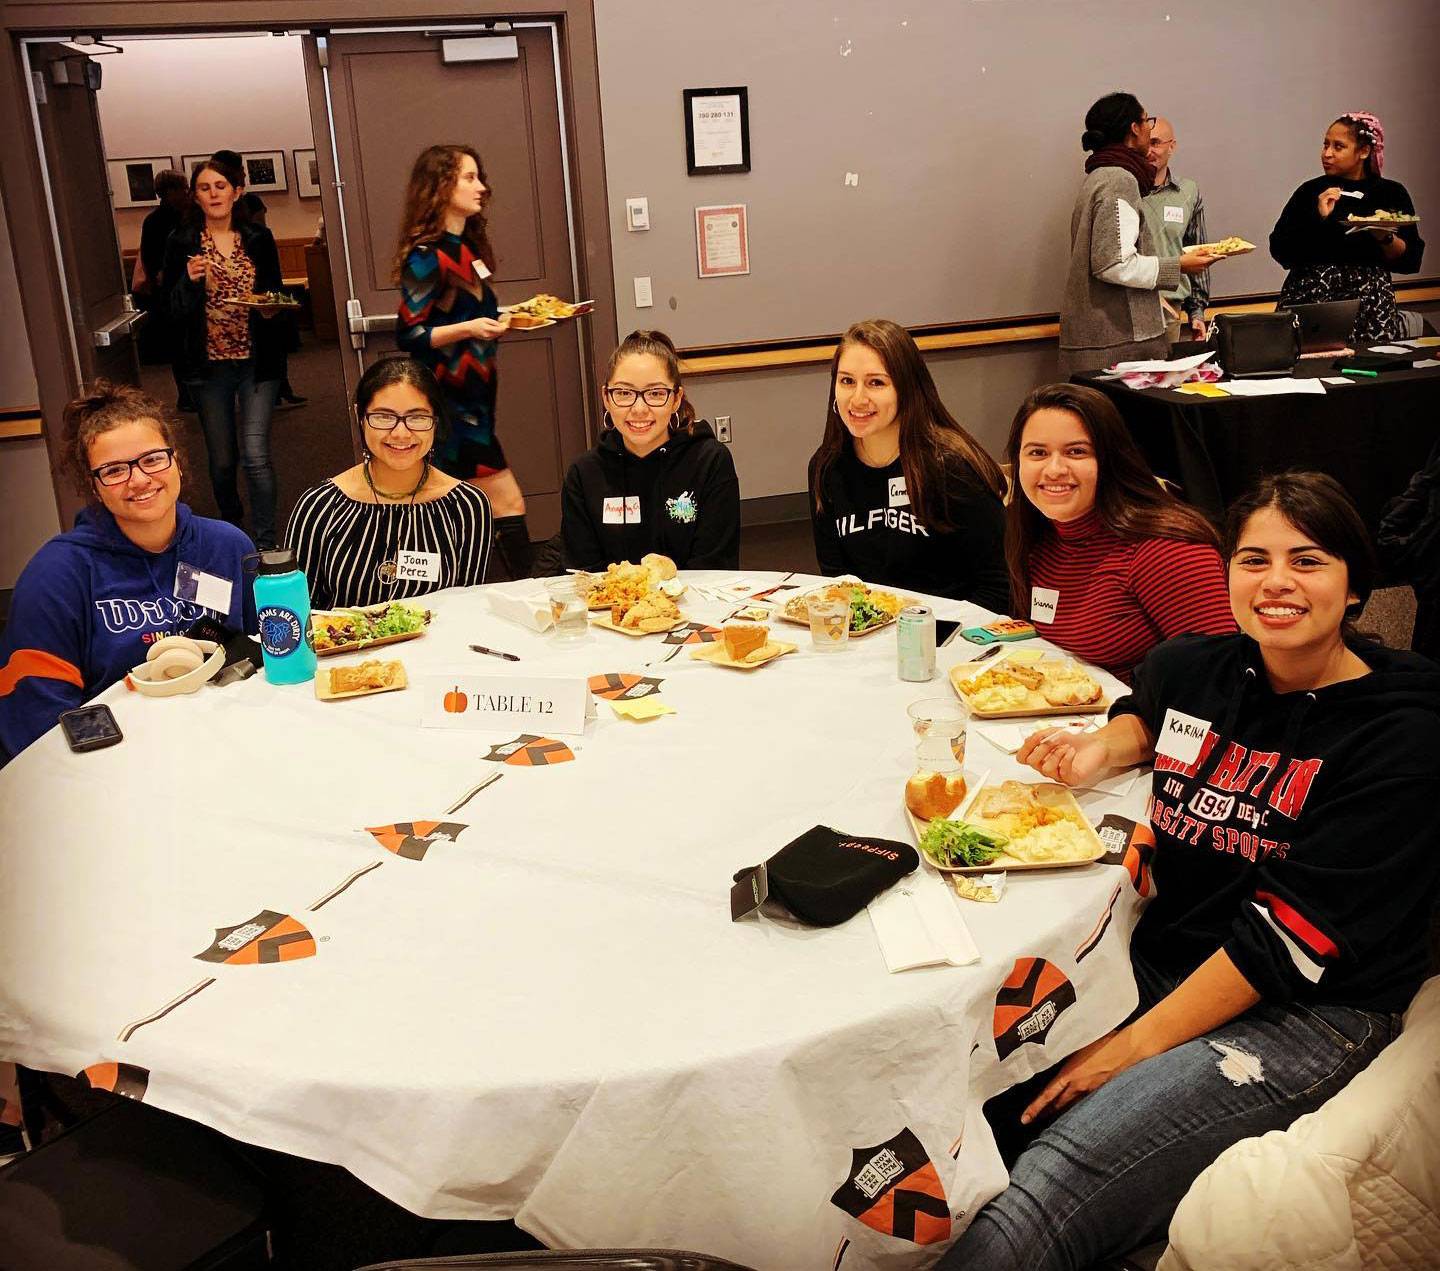 Students share a meal together at a table